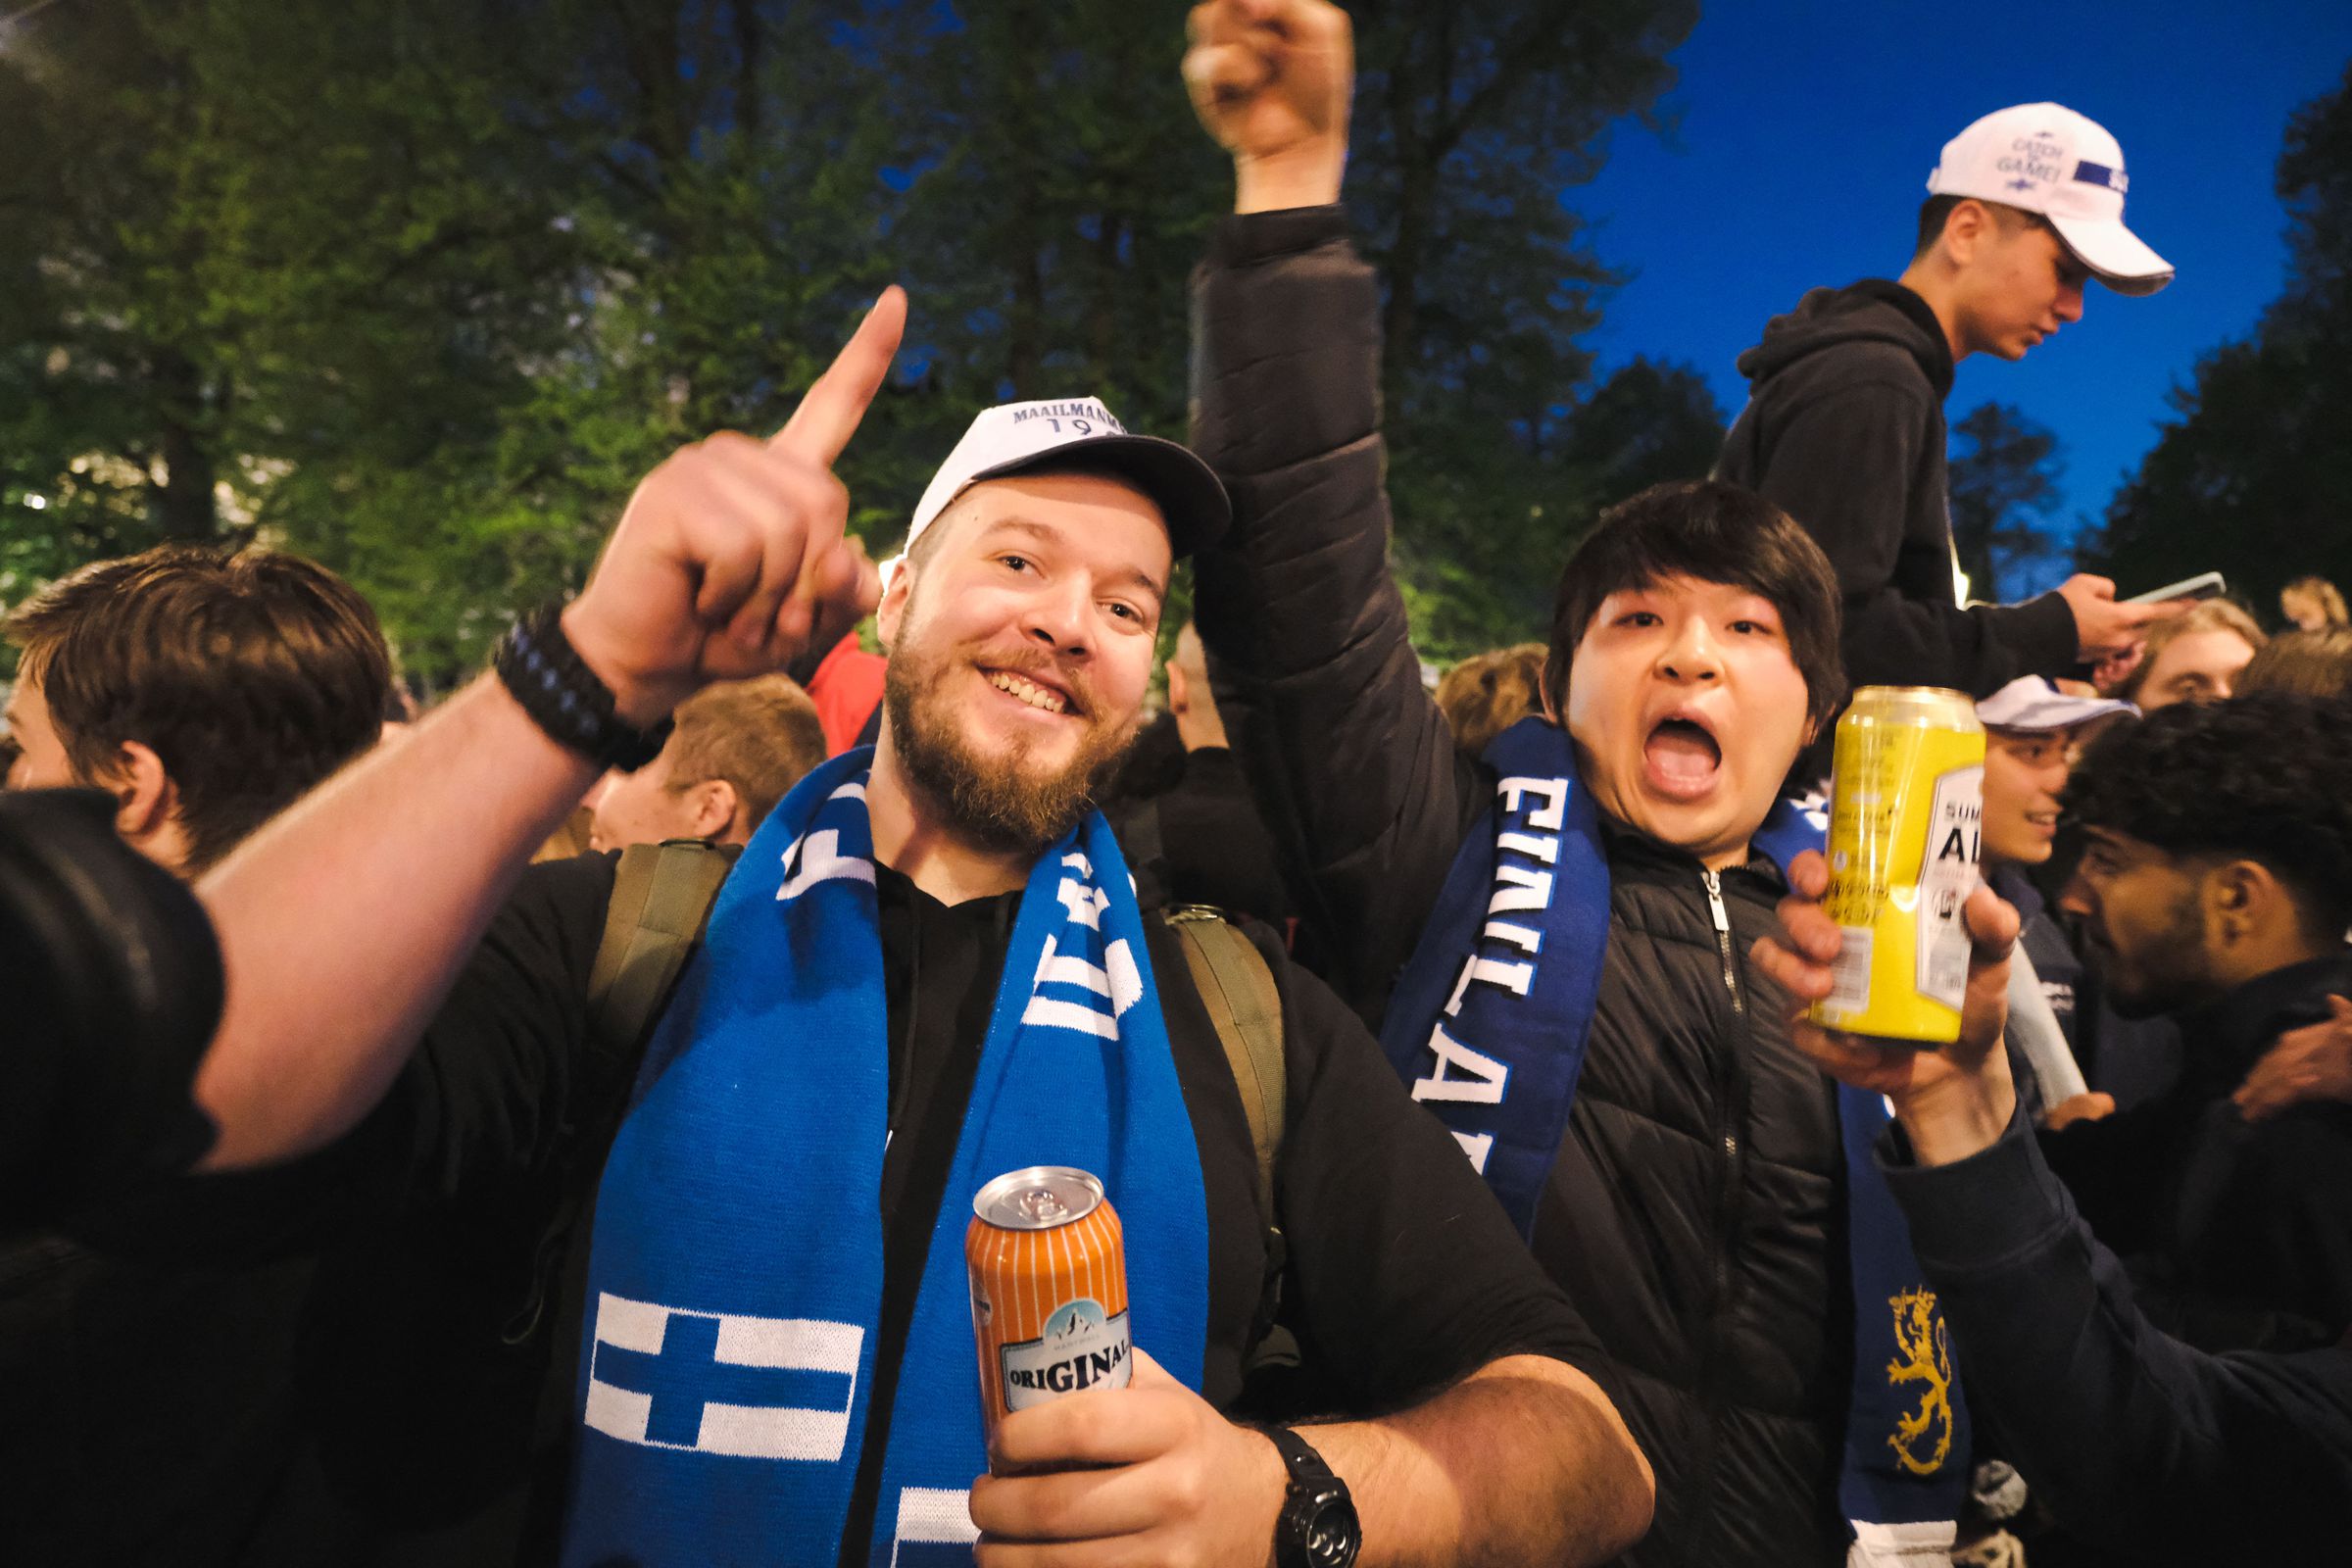 Ice hockey fans and revelers crowd the Kauppatori square in Helsinki on May 29th, 2022, to celebrate Finland winning the 2022 Ice Hockey World Championship, beating Canada 4–3 in the final.